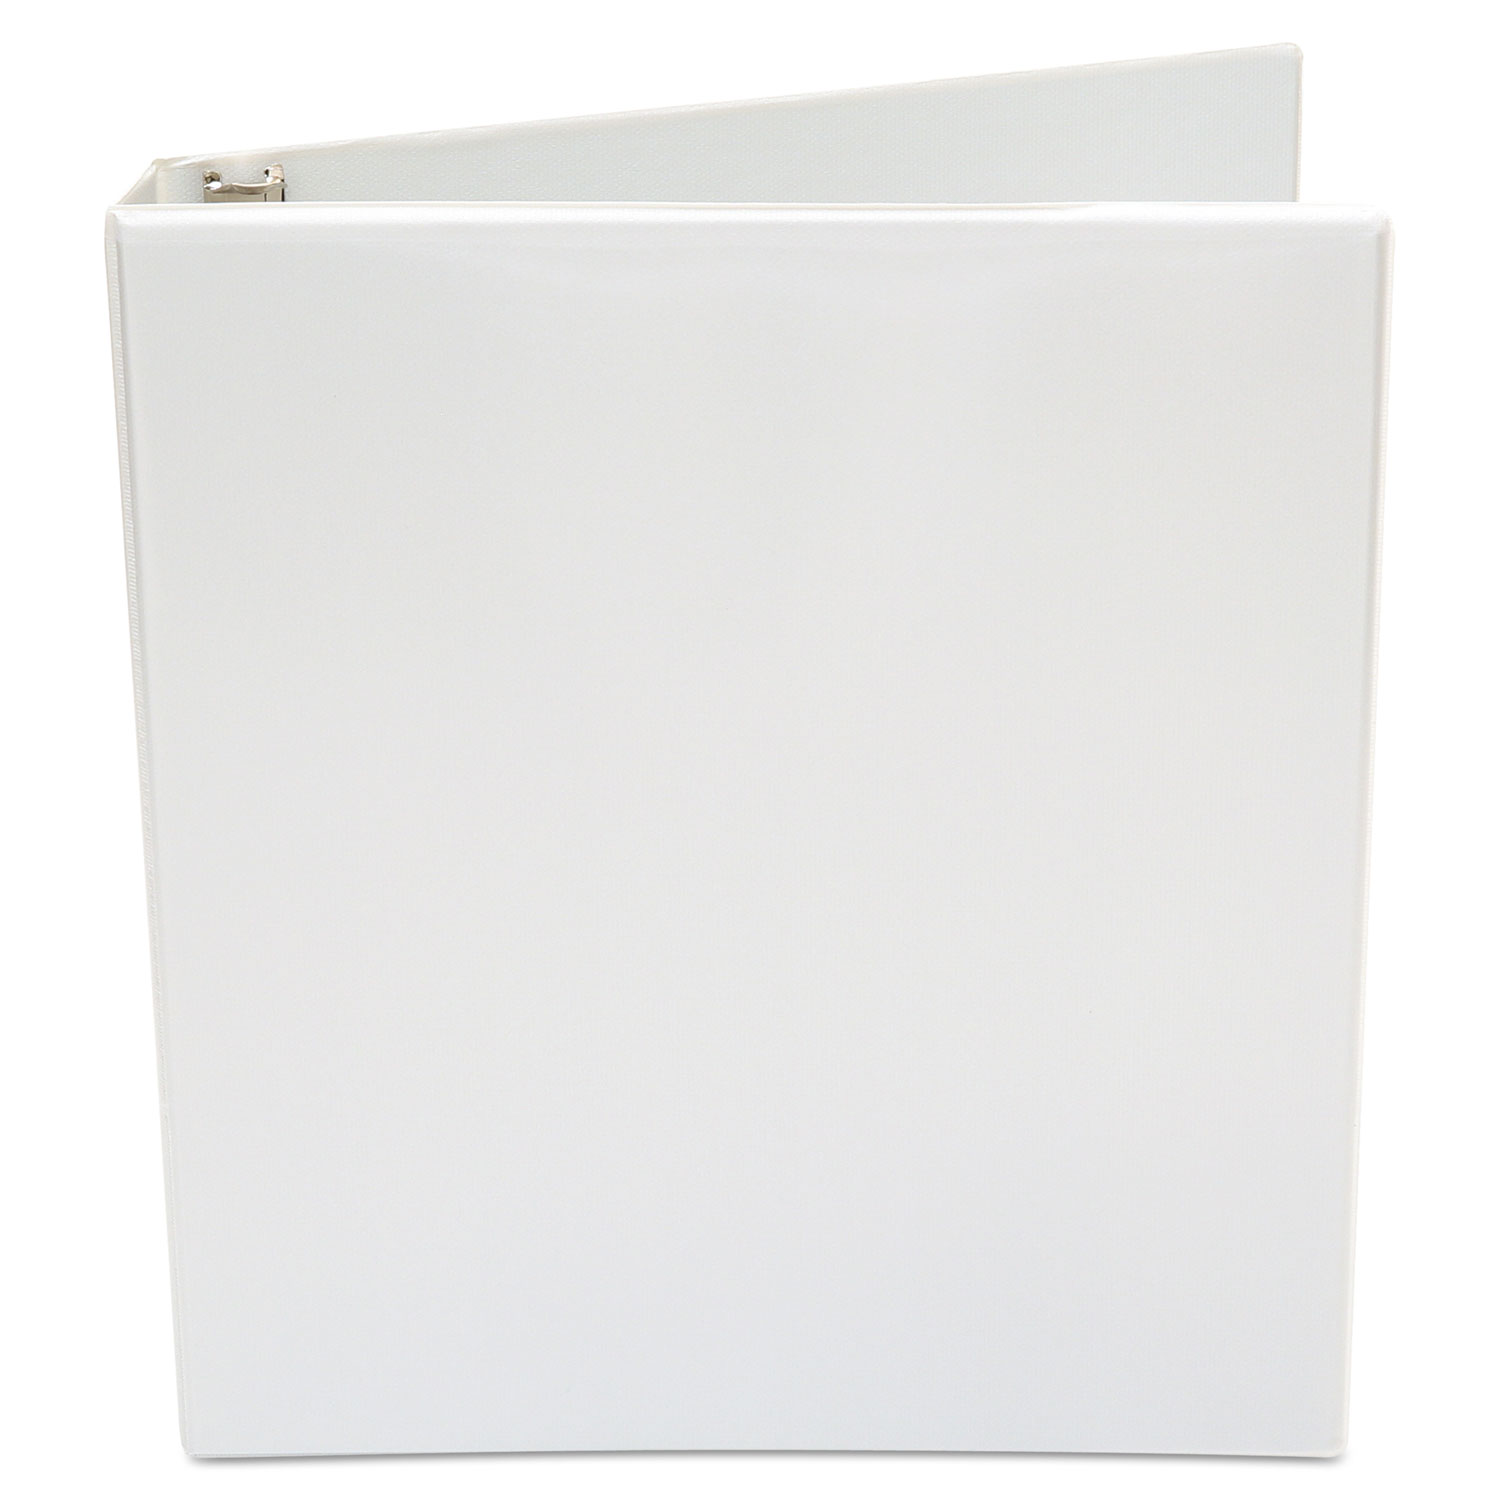 Deluxe Round Ring View Binder, 1 Capacity, White